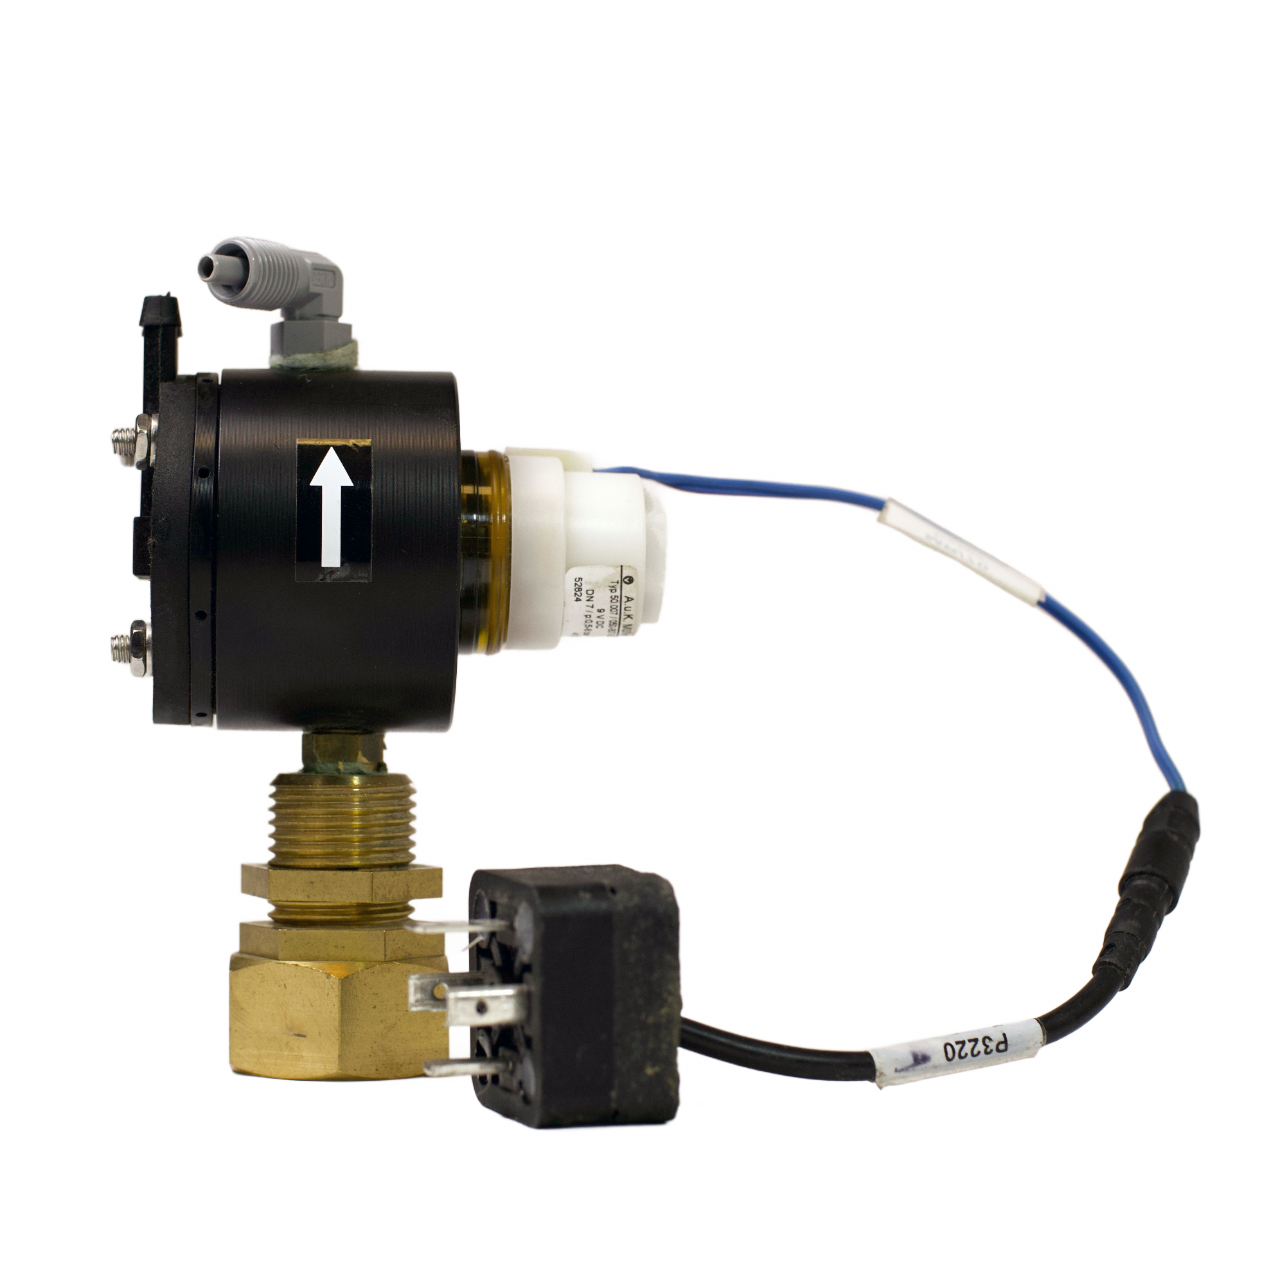 PSE1804  - Solenoid Assembly for Intersan Saniwave Lavatory